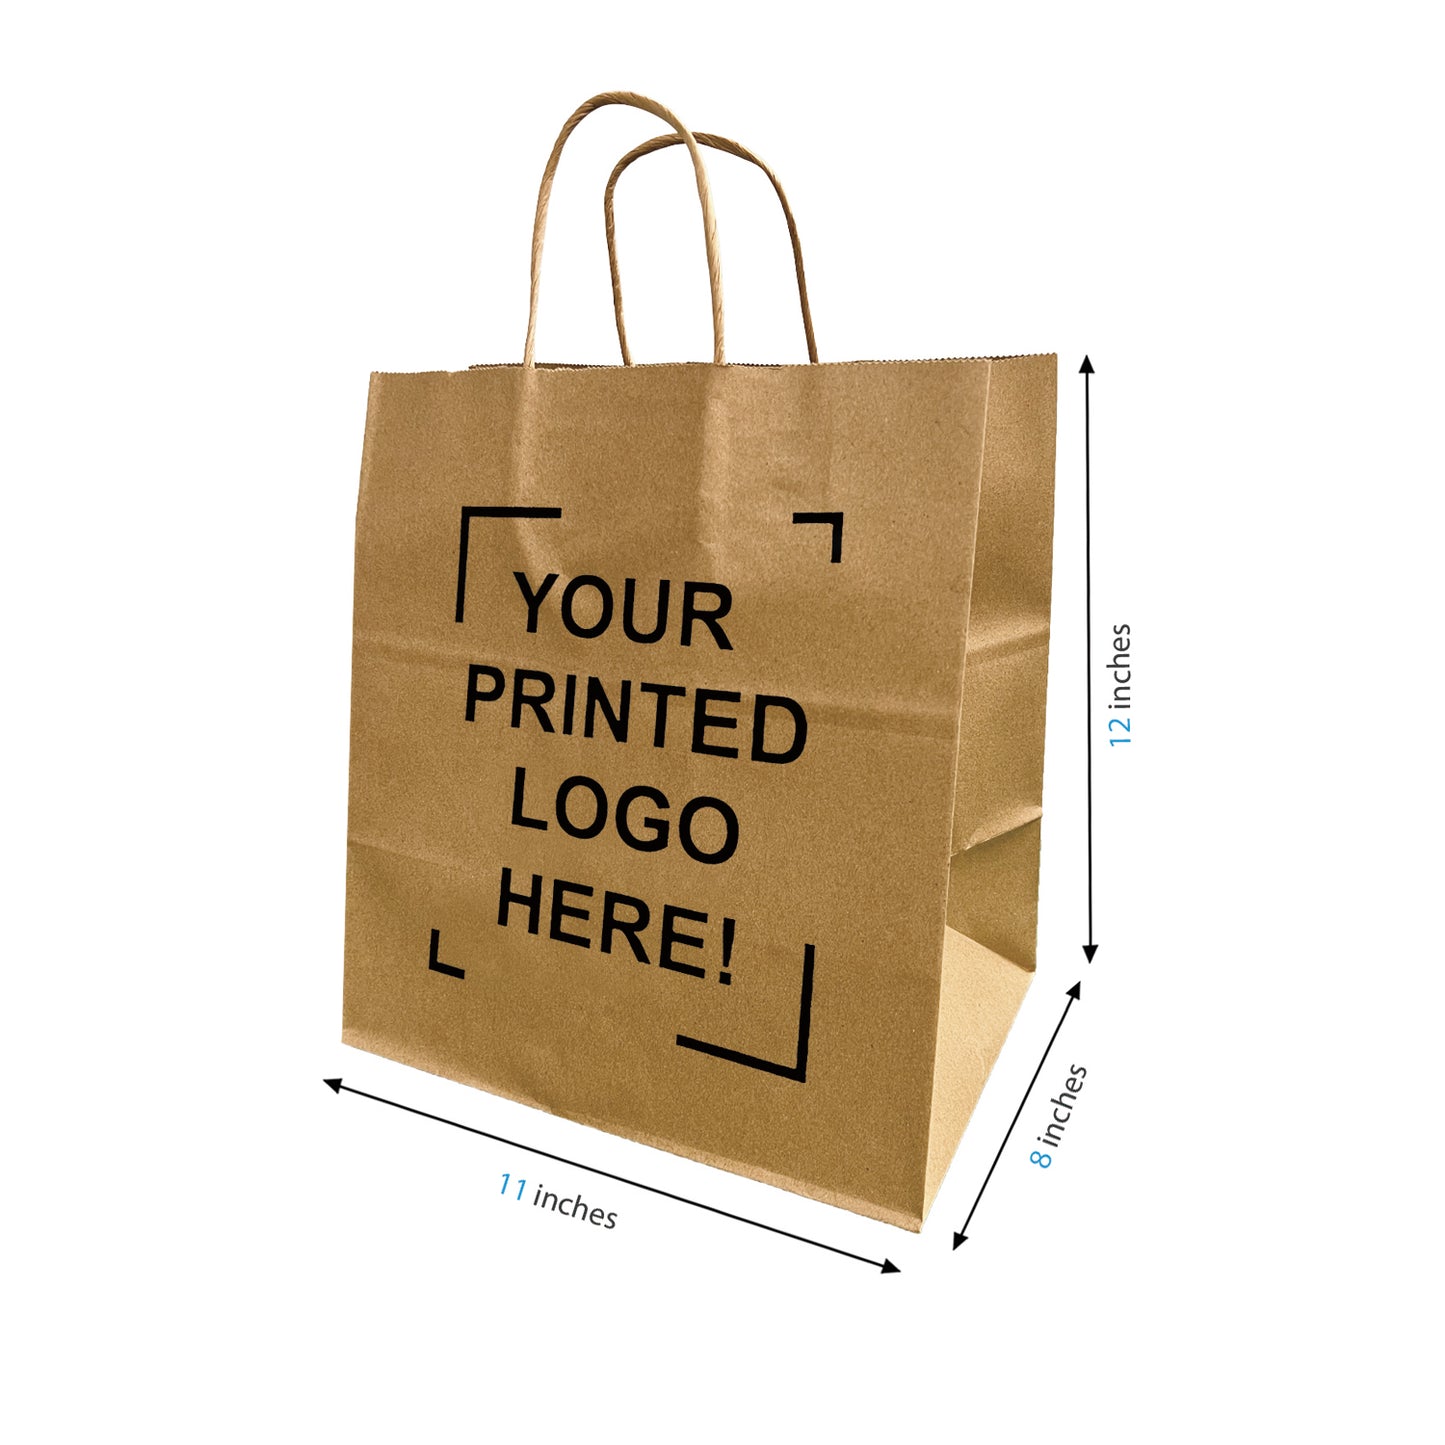 200pcs, Cafe 11x8x12 inches Kraft Paper Bags Cardboard Insert Twisted Handles; Full Color Custom Print, Printed in Canada